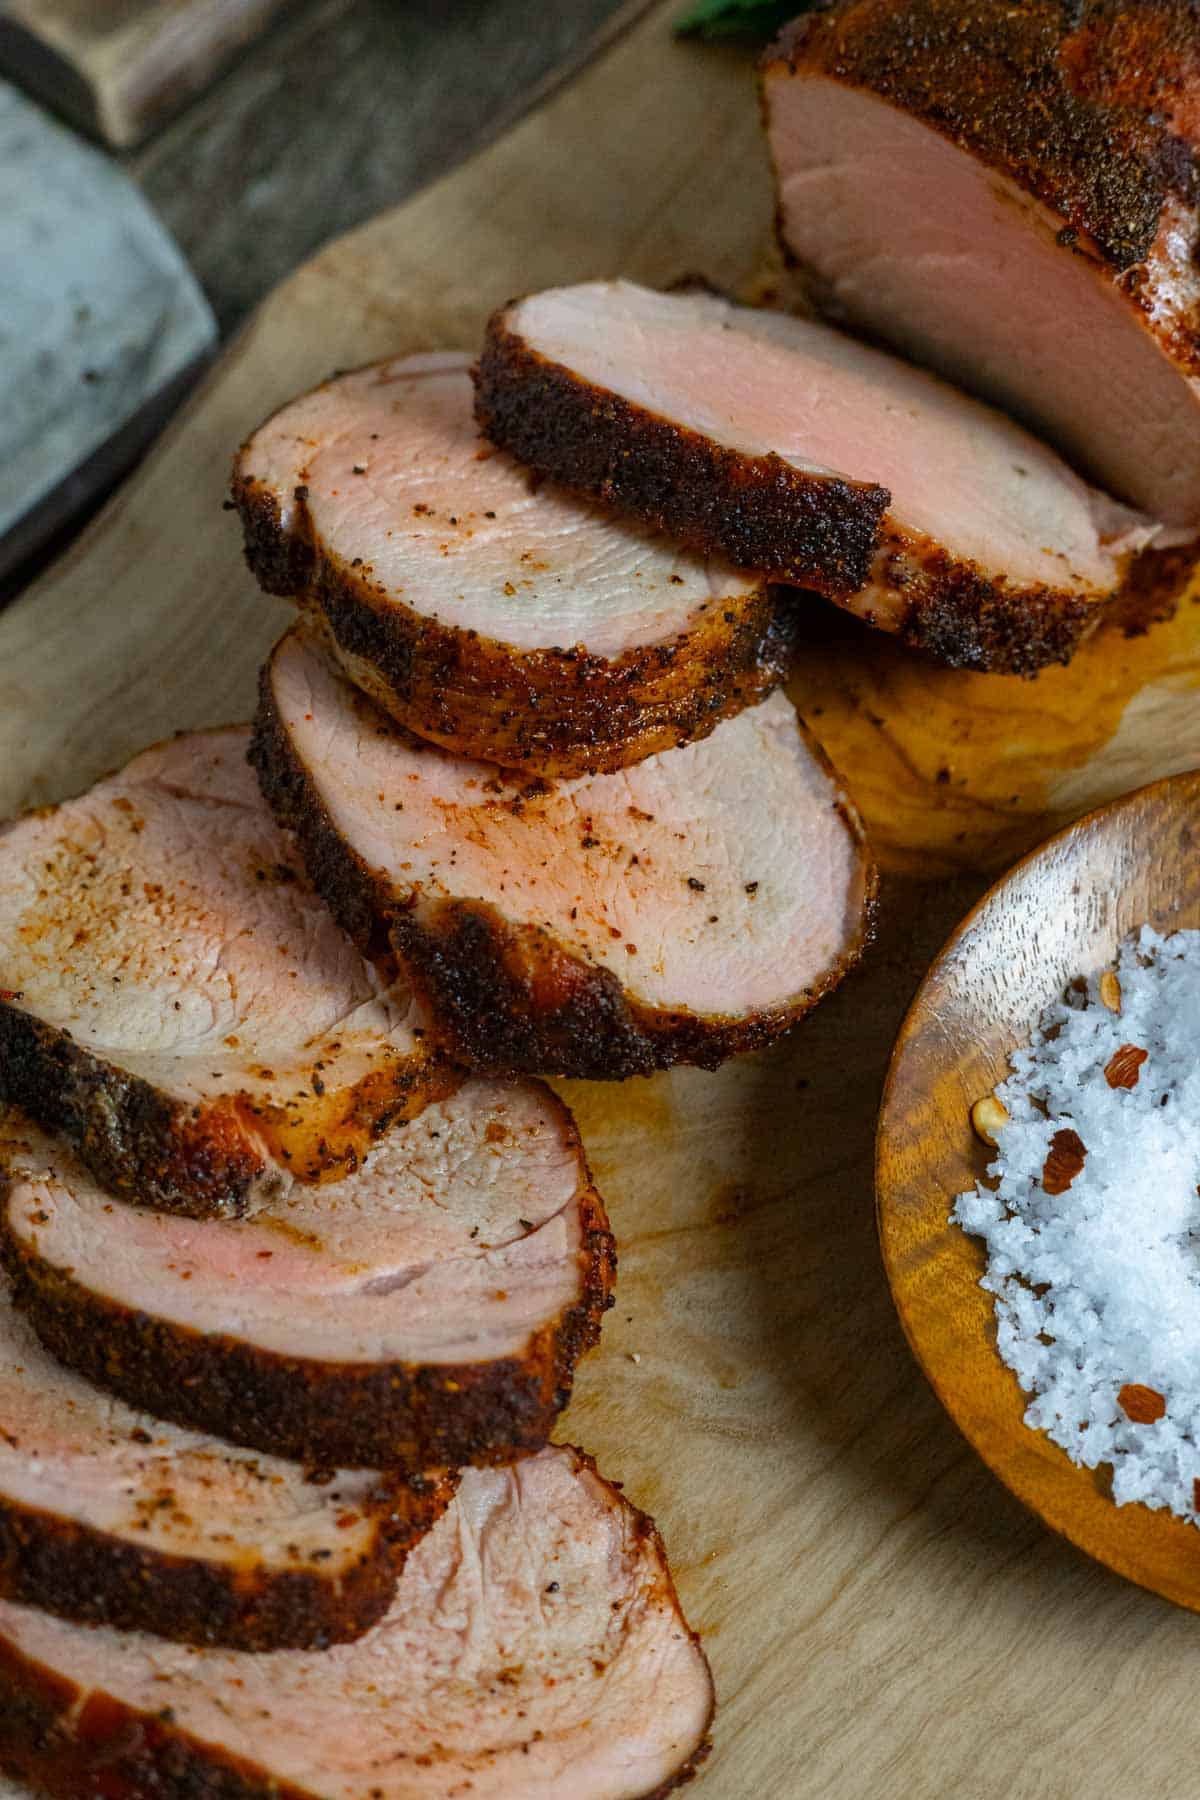 Slices of smoked pork tenderloin on a board next to a wood bowl of flake salt.